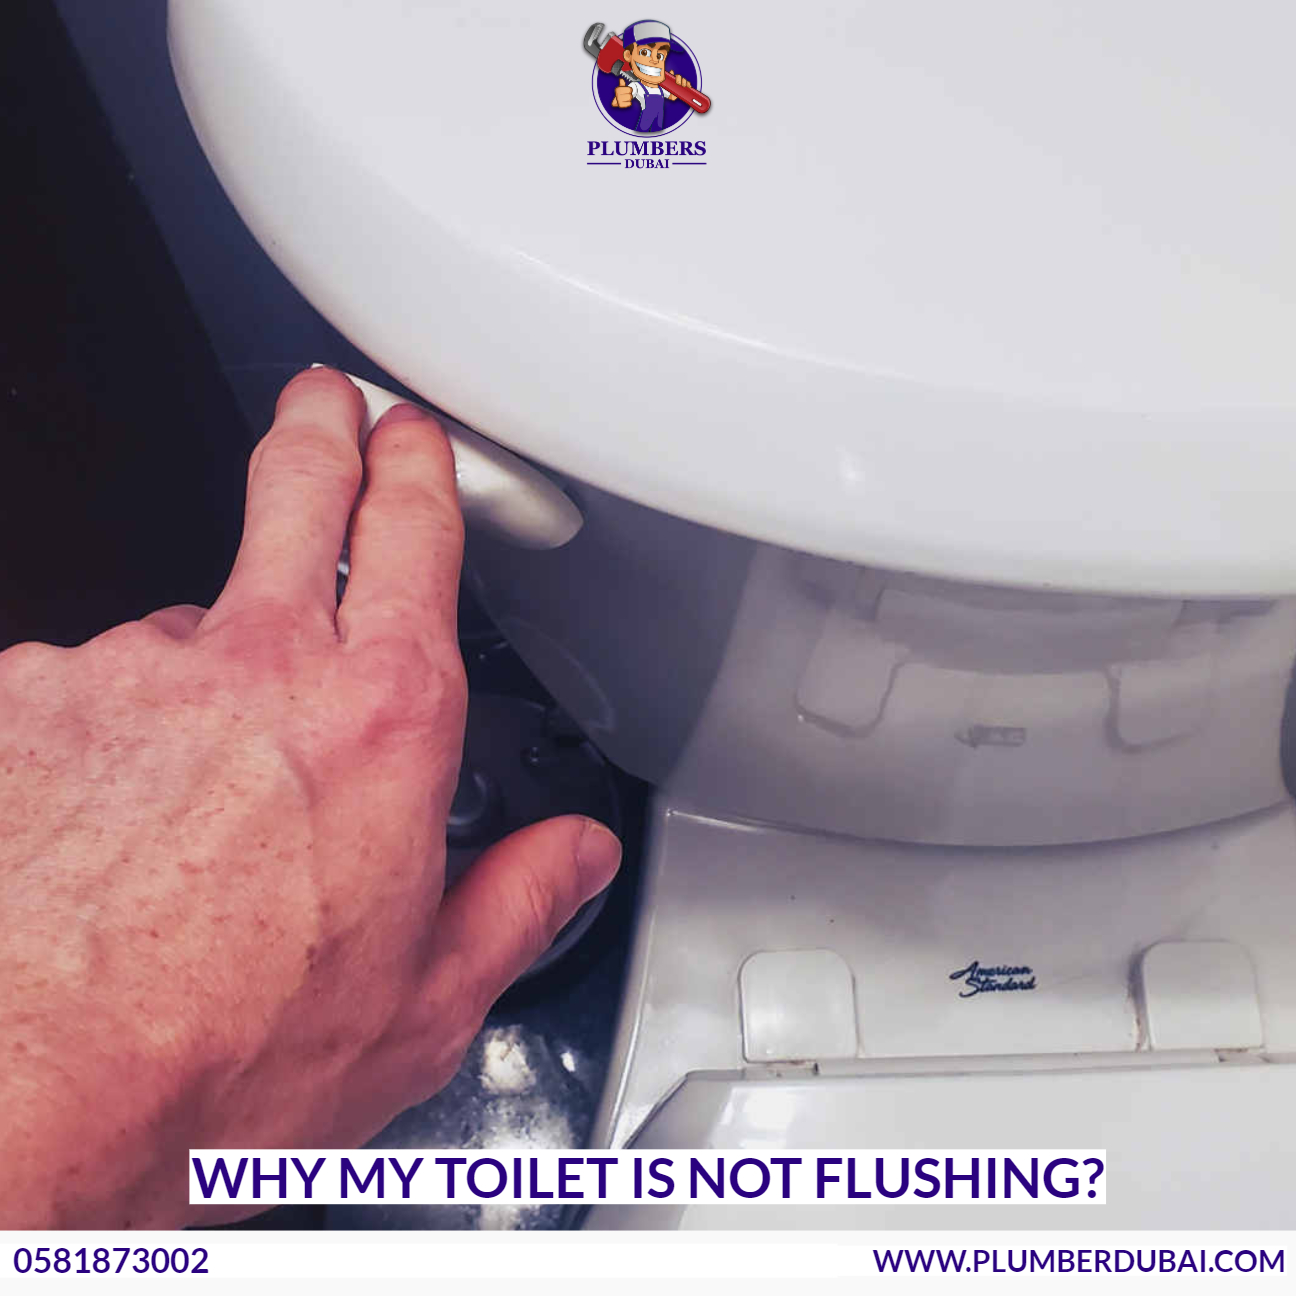 Why My Toilet Is Not Flushing?